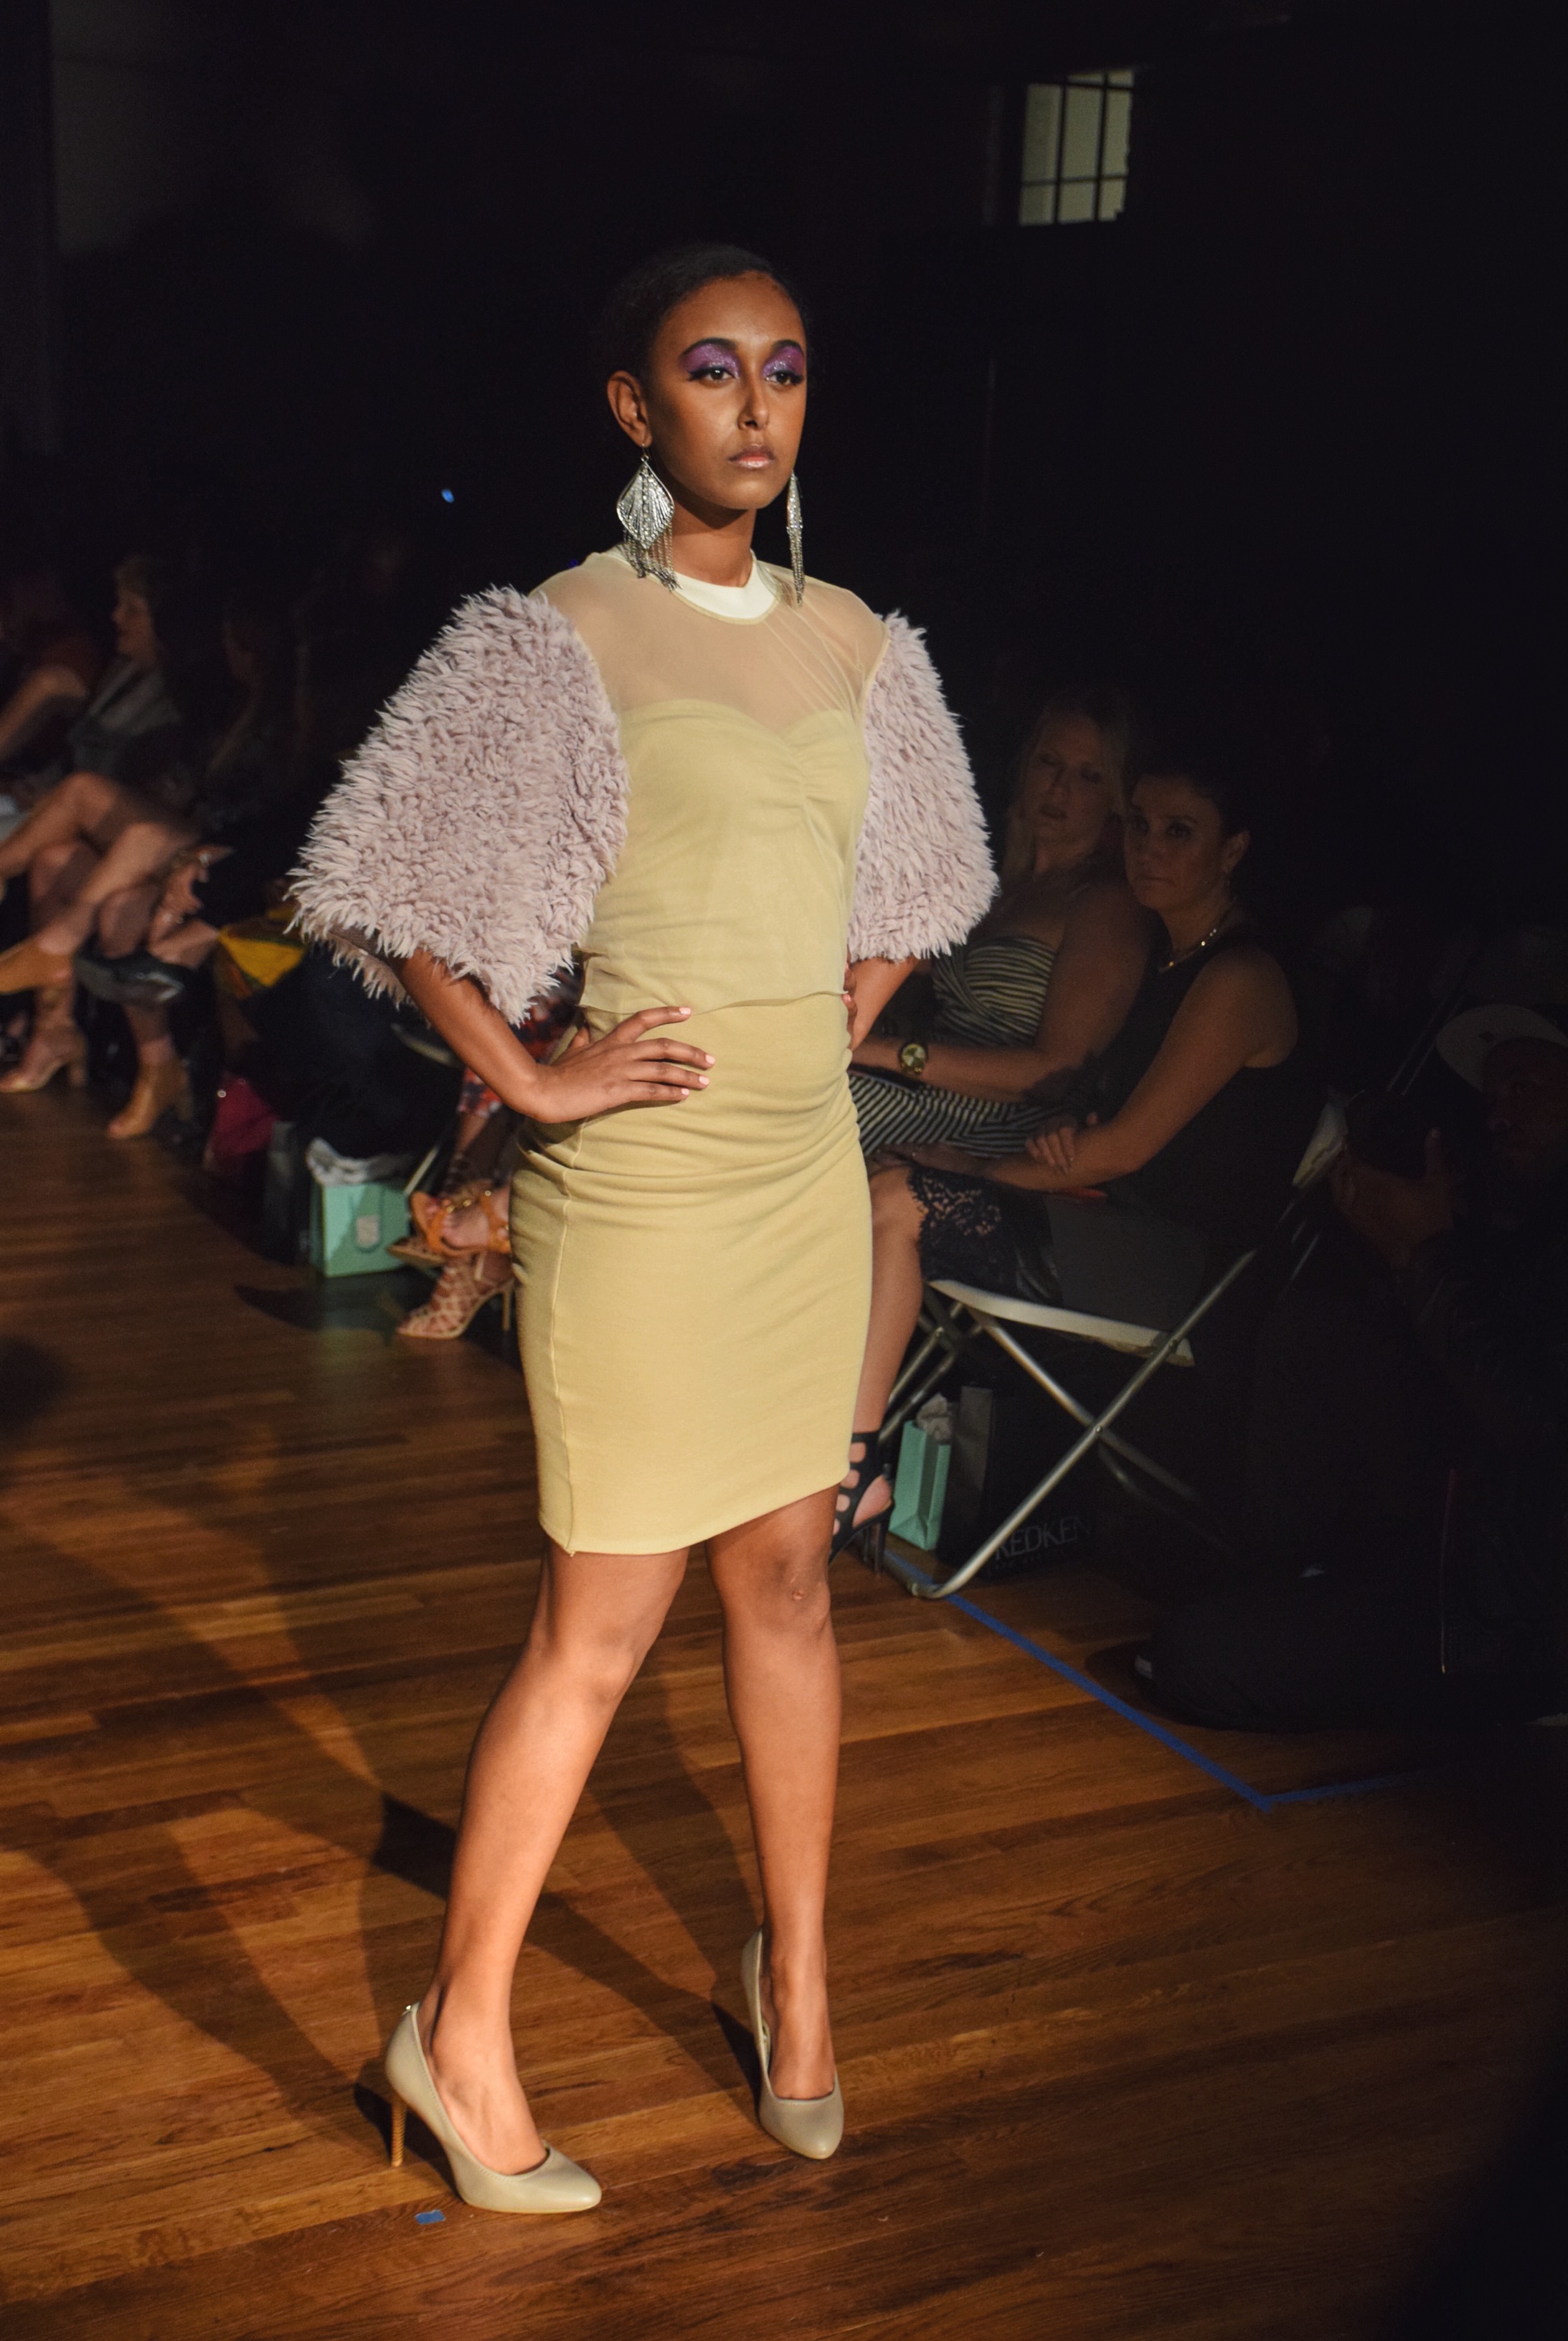 LaPosh by India Watson played with sheer and teddy fur accents on formal wear adding a playful edge.